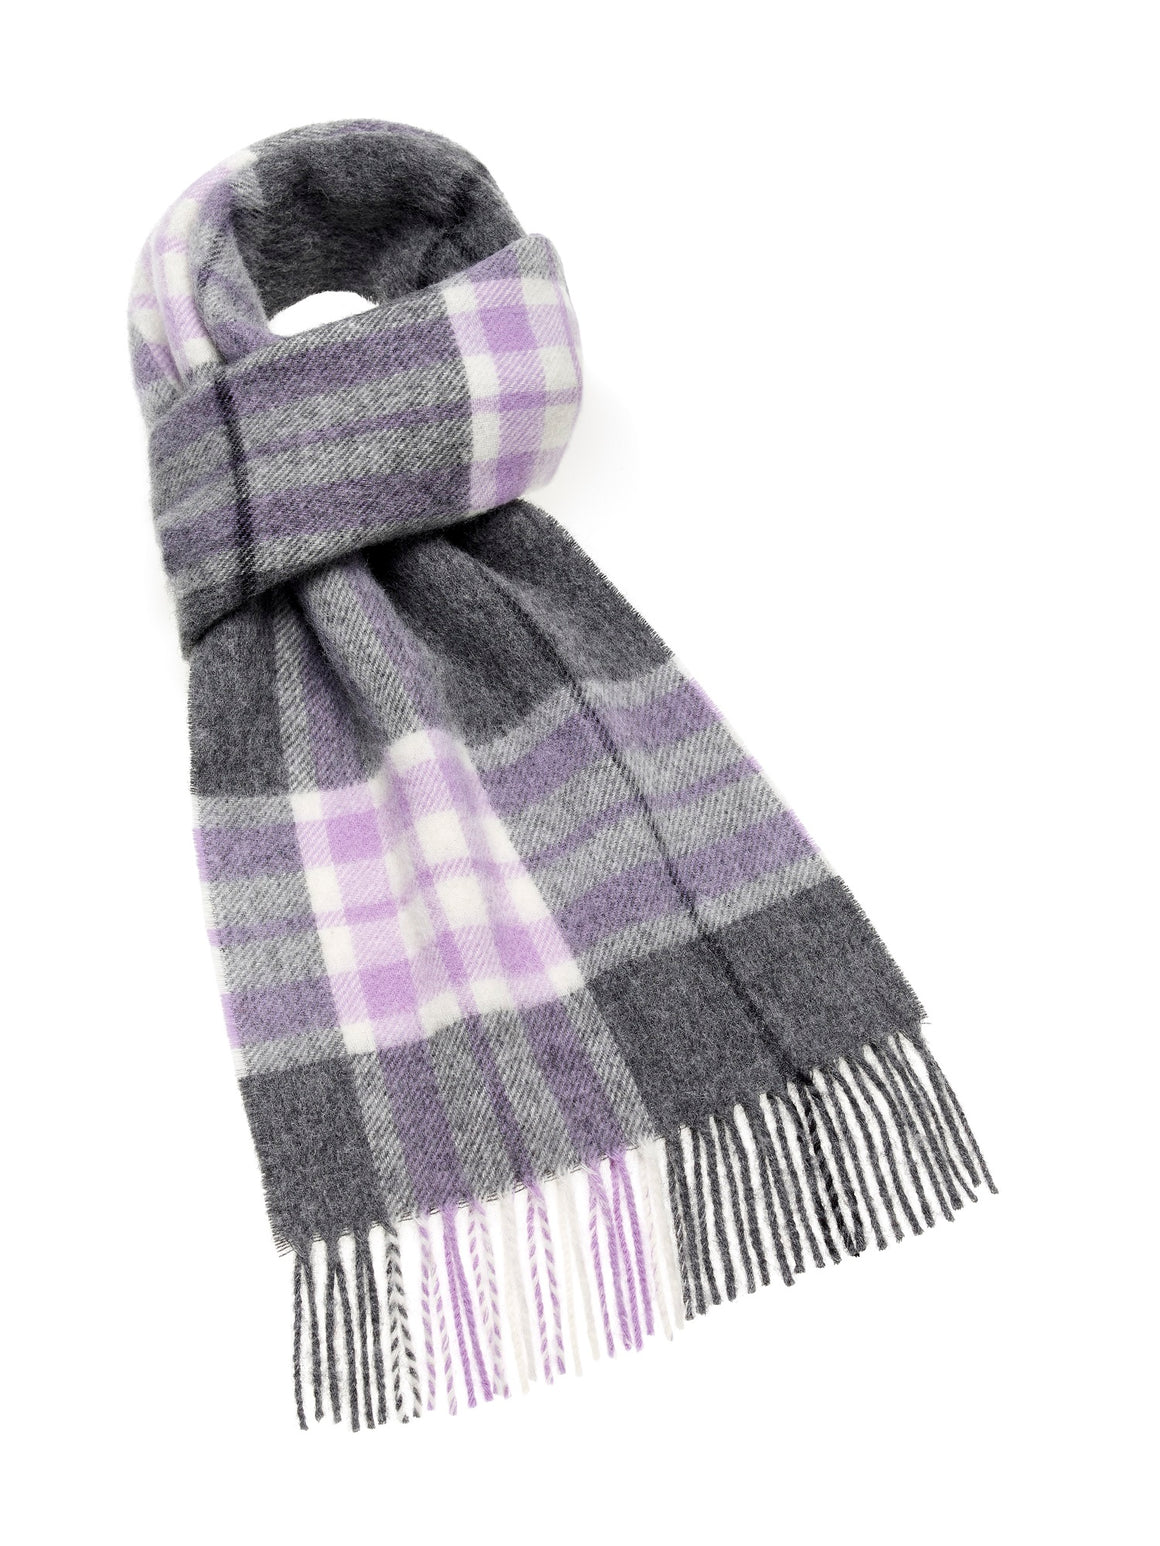 Westminster Lilac/Gray Scarf, Merino Lambswool, Made in England, Bronte Moon